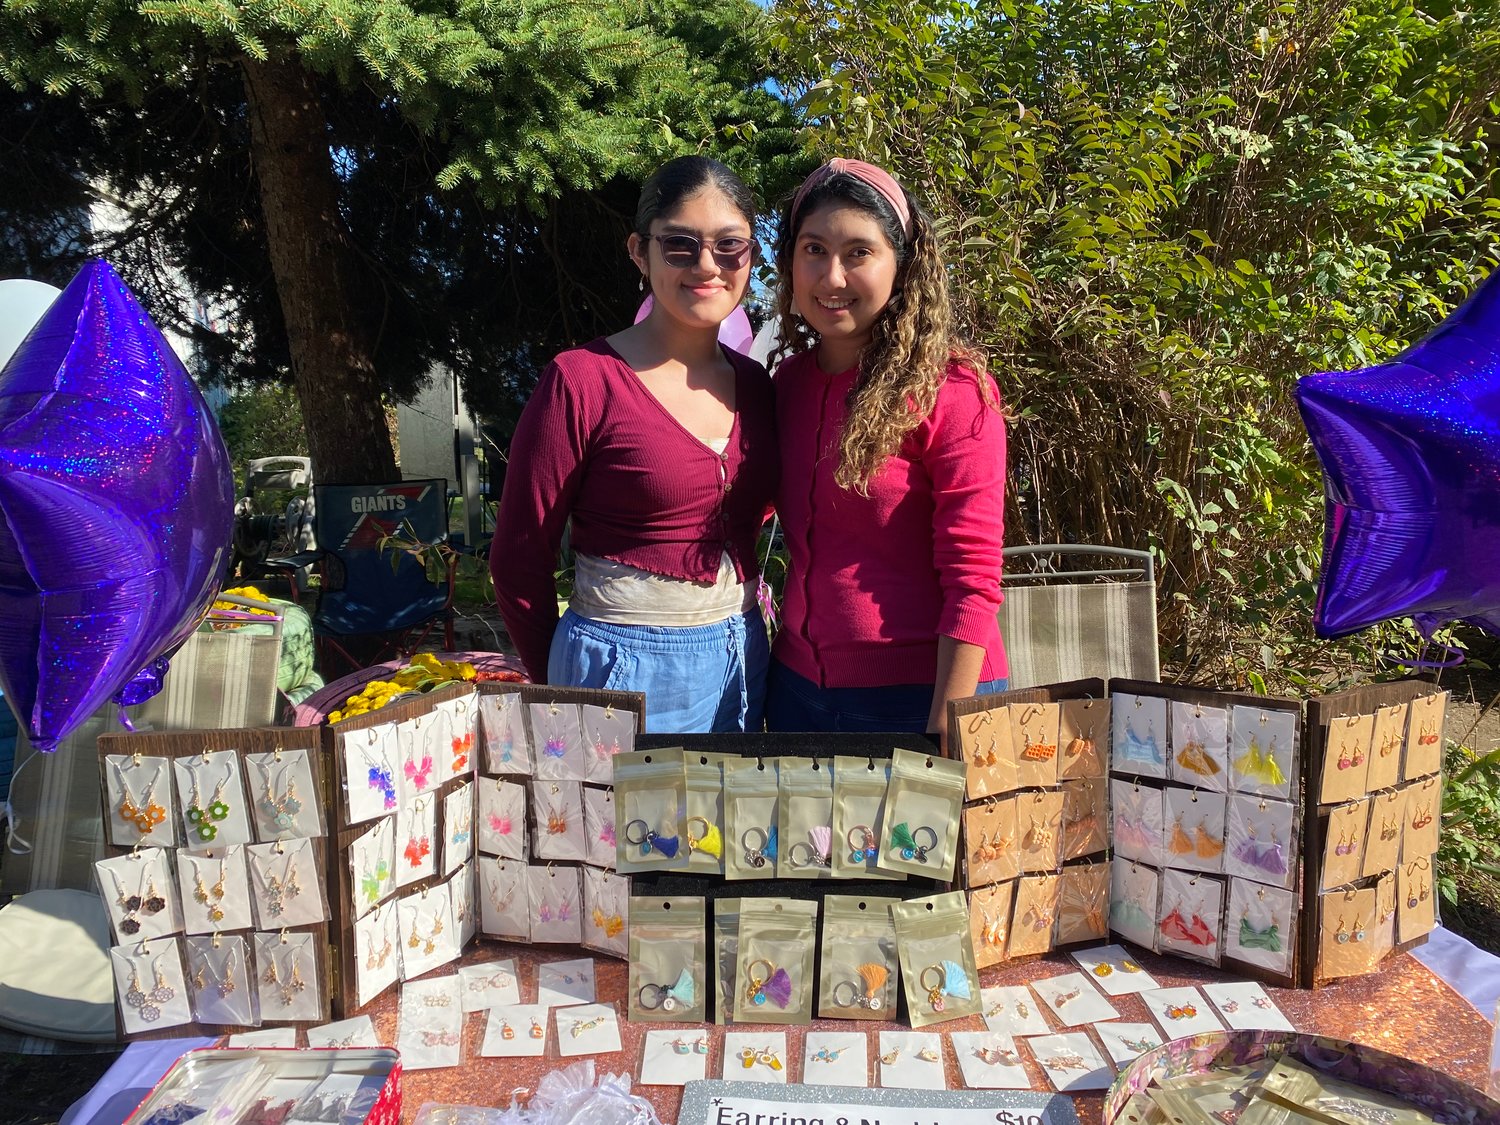 Alexa and Kimberly Aguila, co-owners of Alexa’s Workshop, sold crafted jewelry for the first time at the Oktoberfest and Marketplace.